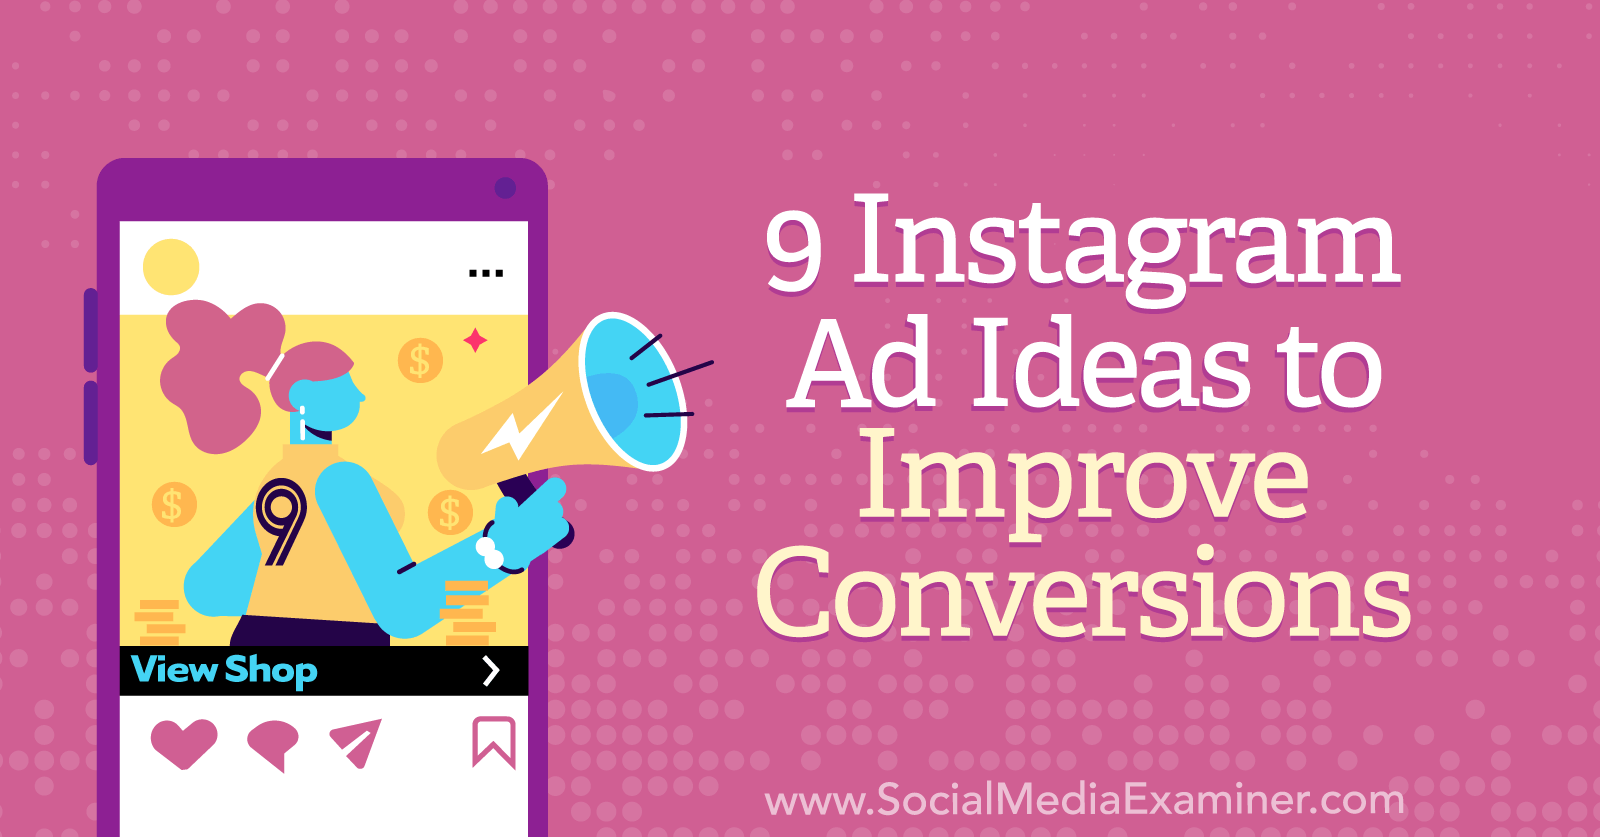 9 Instagram Ad Ideas to Improve Conversions by Anna Sonnenberg on Social Media Examiner.